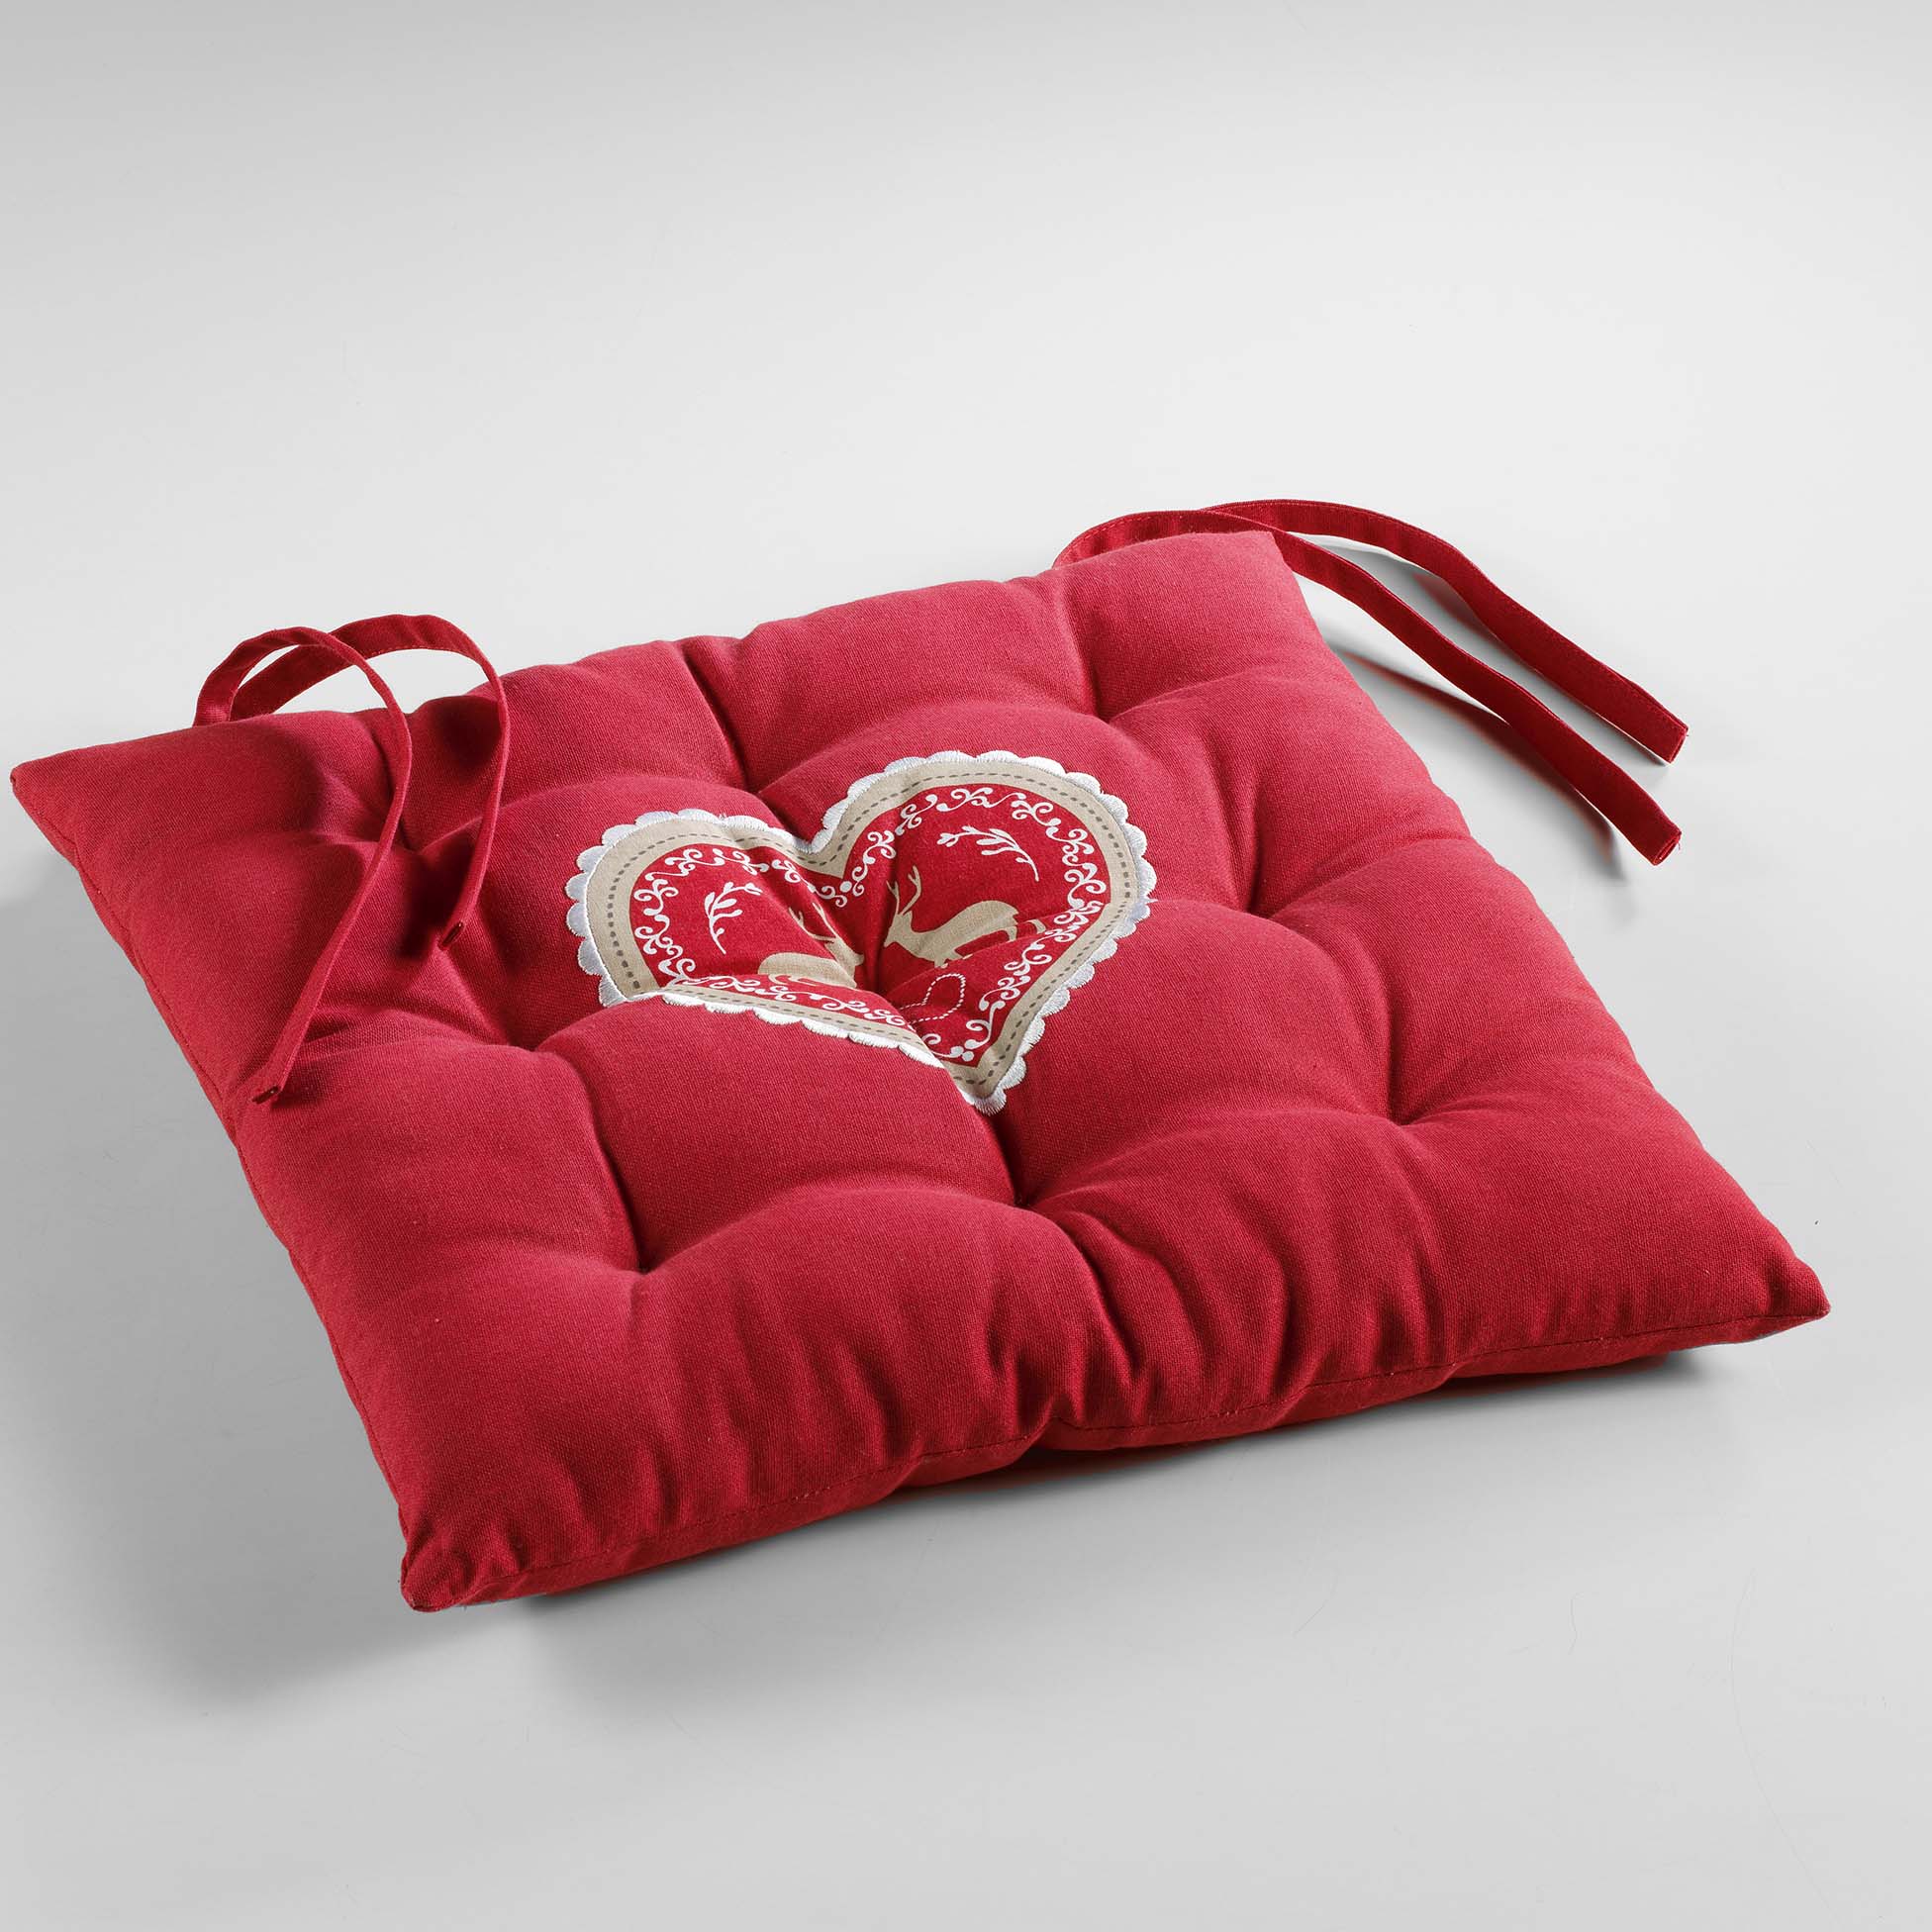 Coussin de chaise Assise matelass Collection Edelweiss